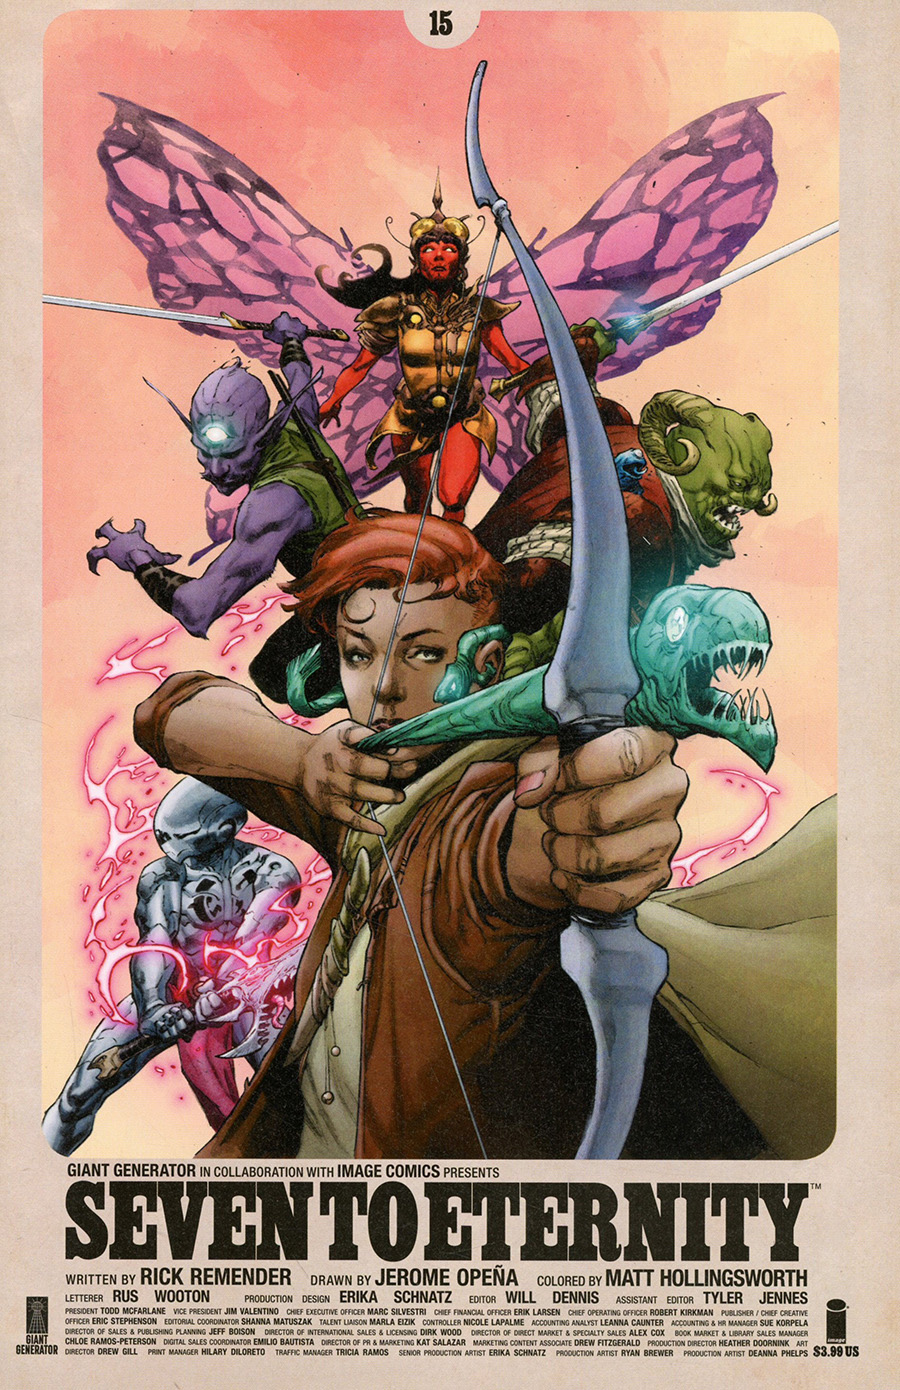 Seven To Eternity #15 Cover A Regular Jerome Opena & Matt Hollingsworth Cover